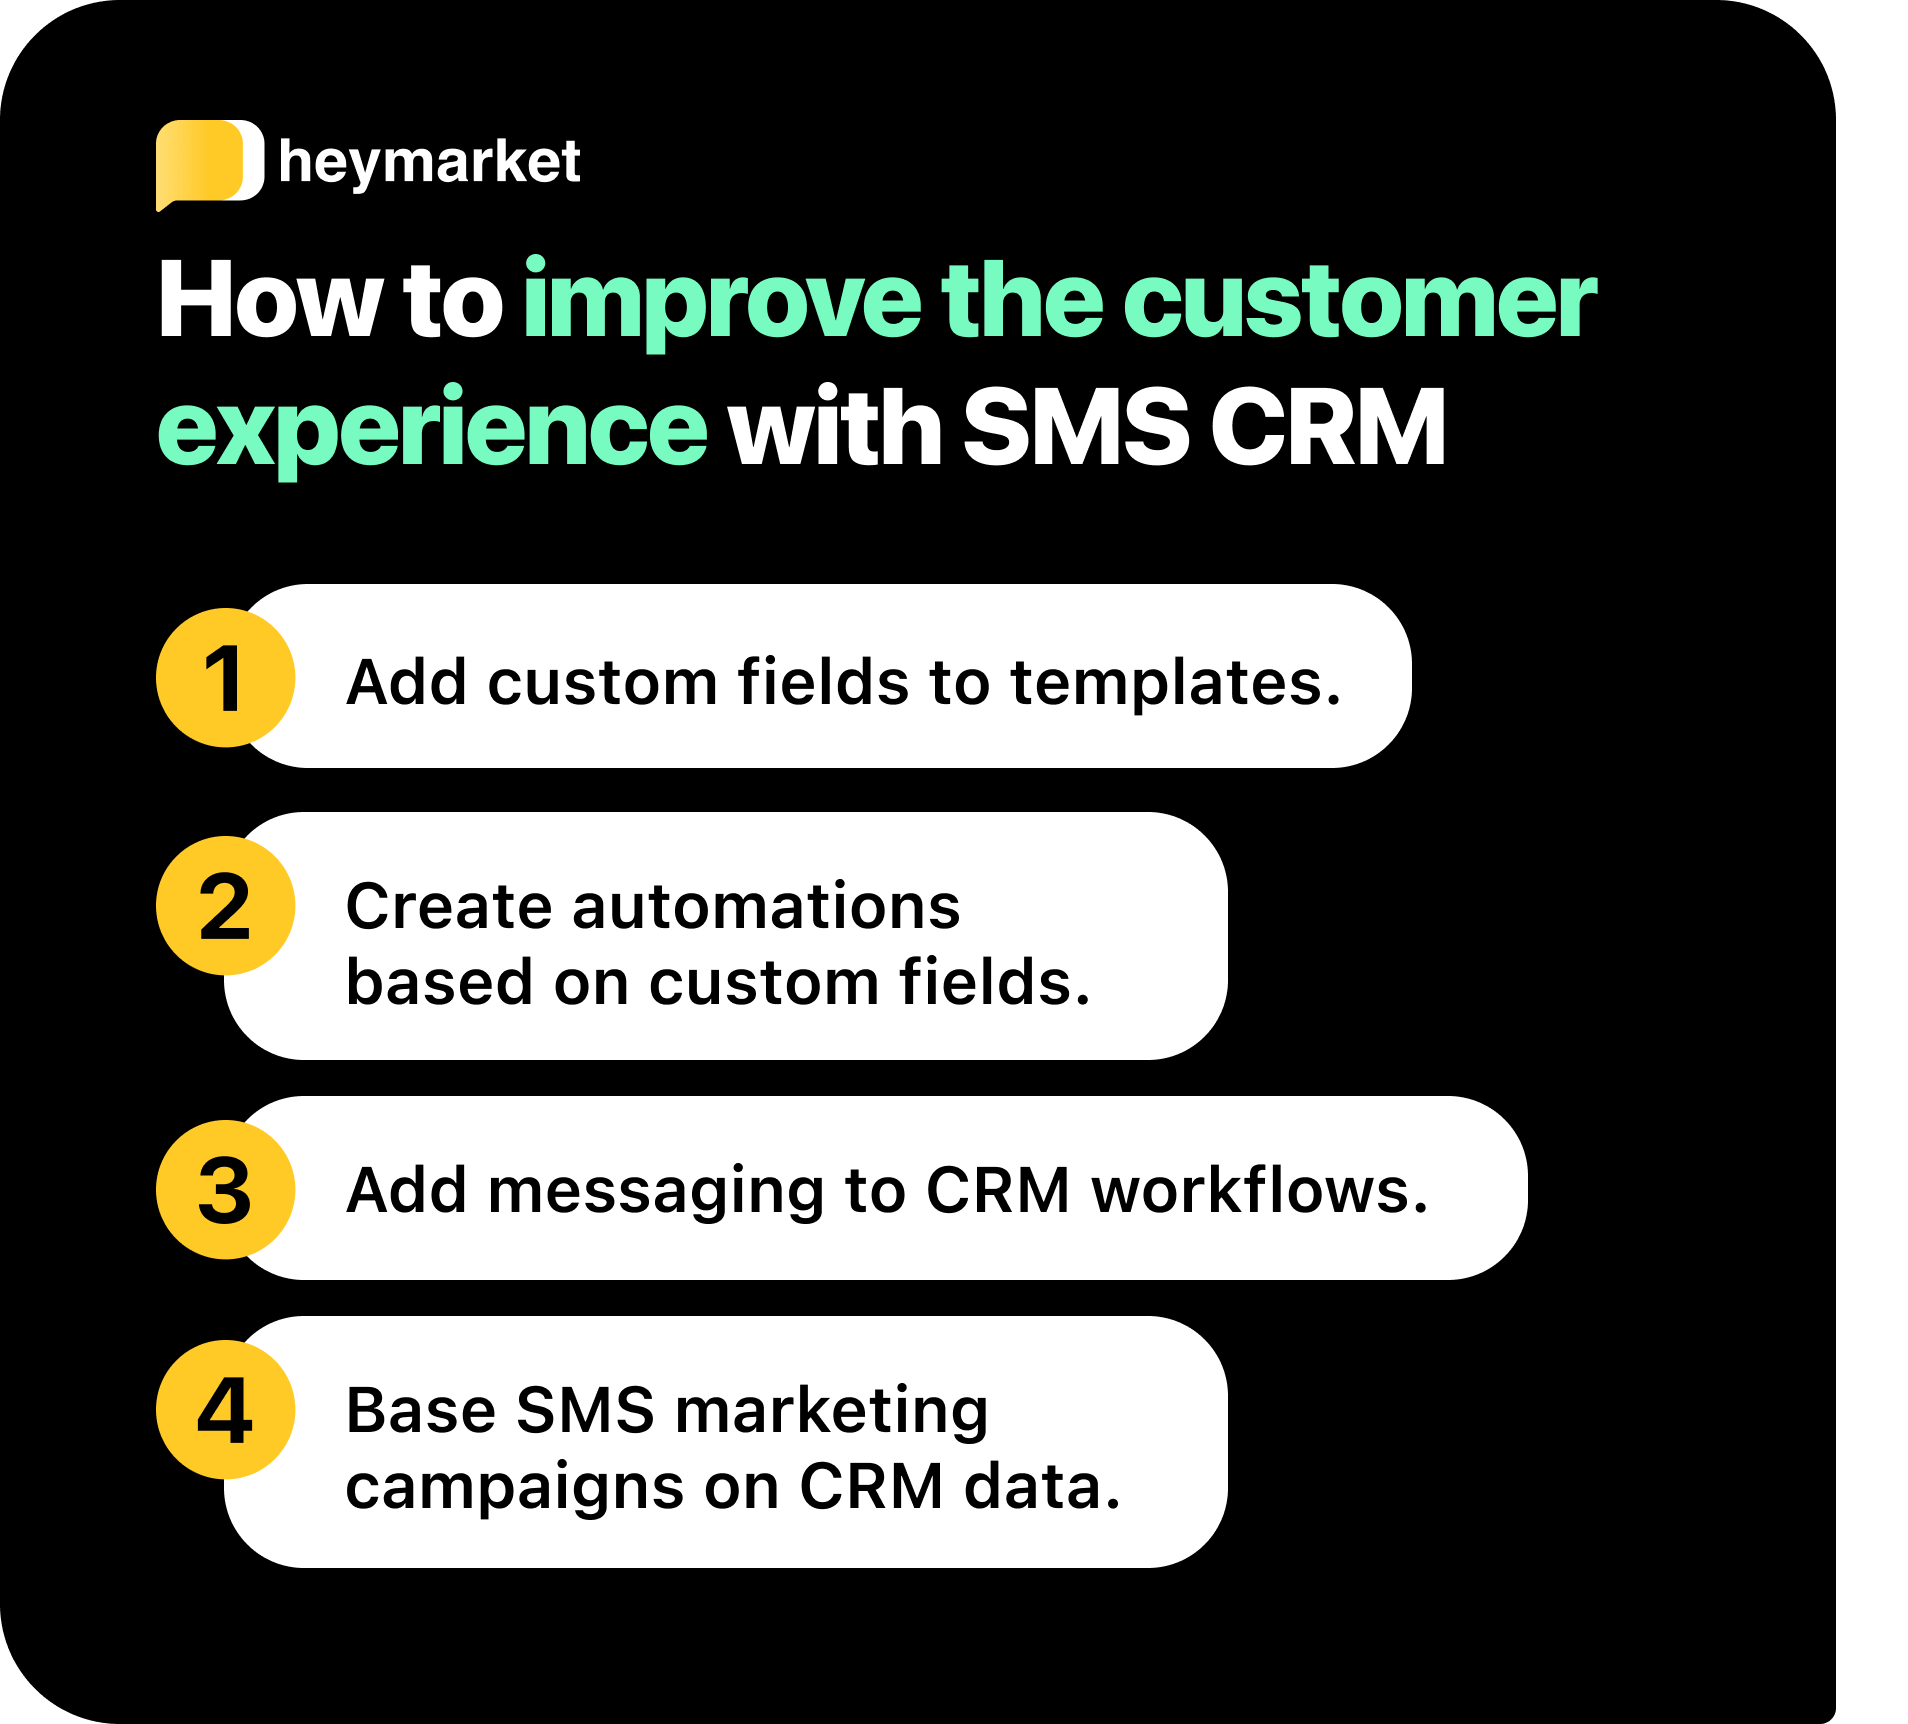 How to improve the customer experience with SMS CRM